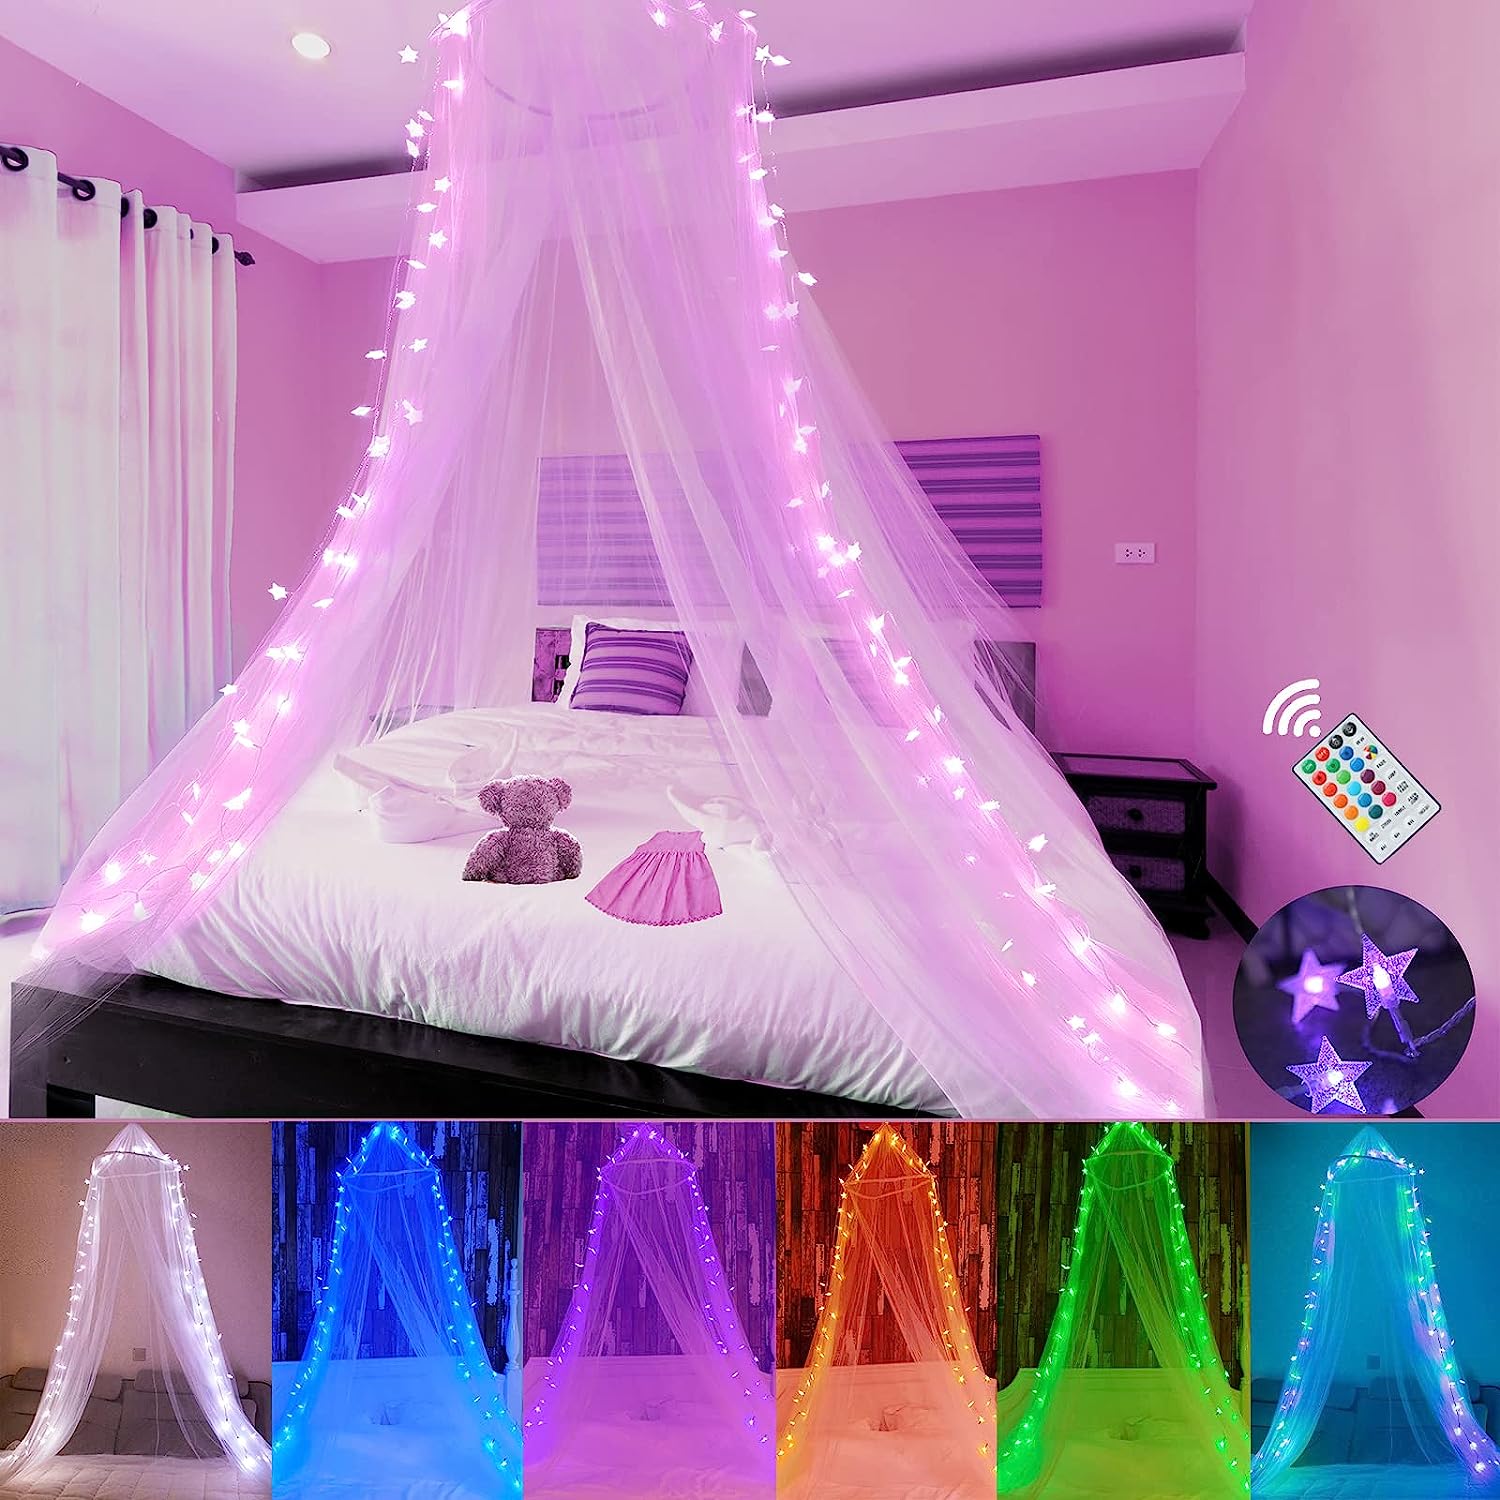 Obrecis Bed Canopy with LED Star Lights